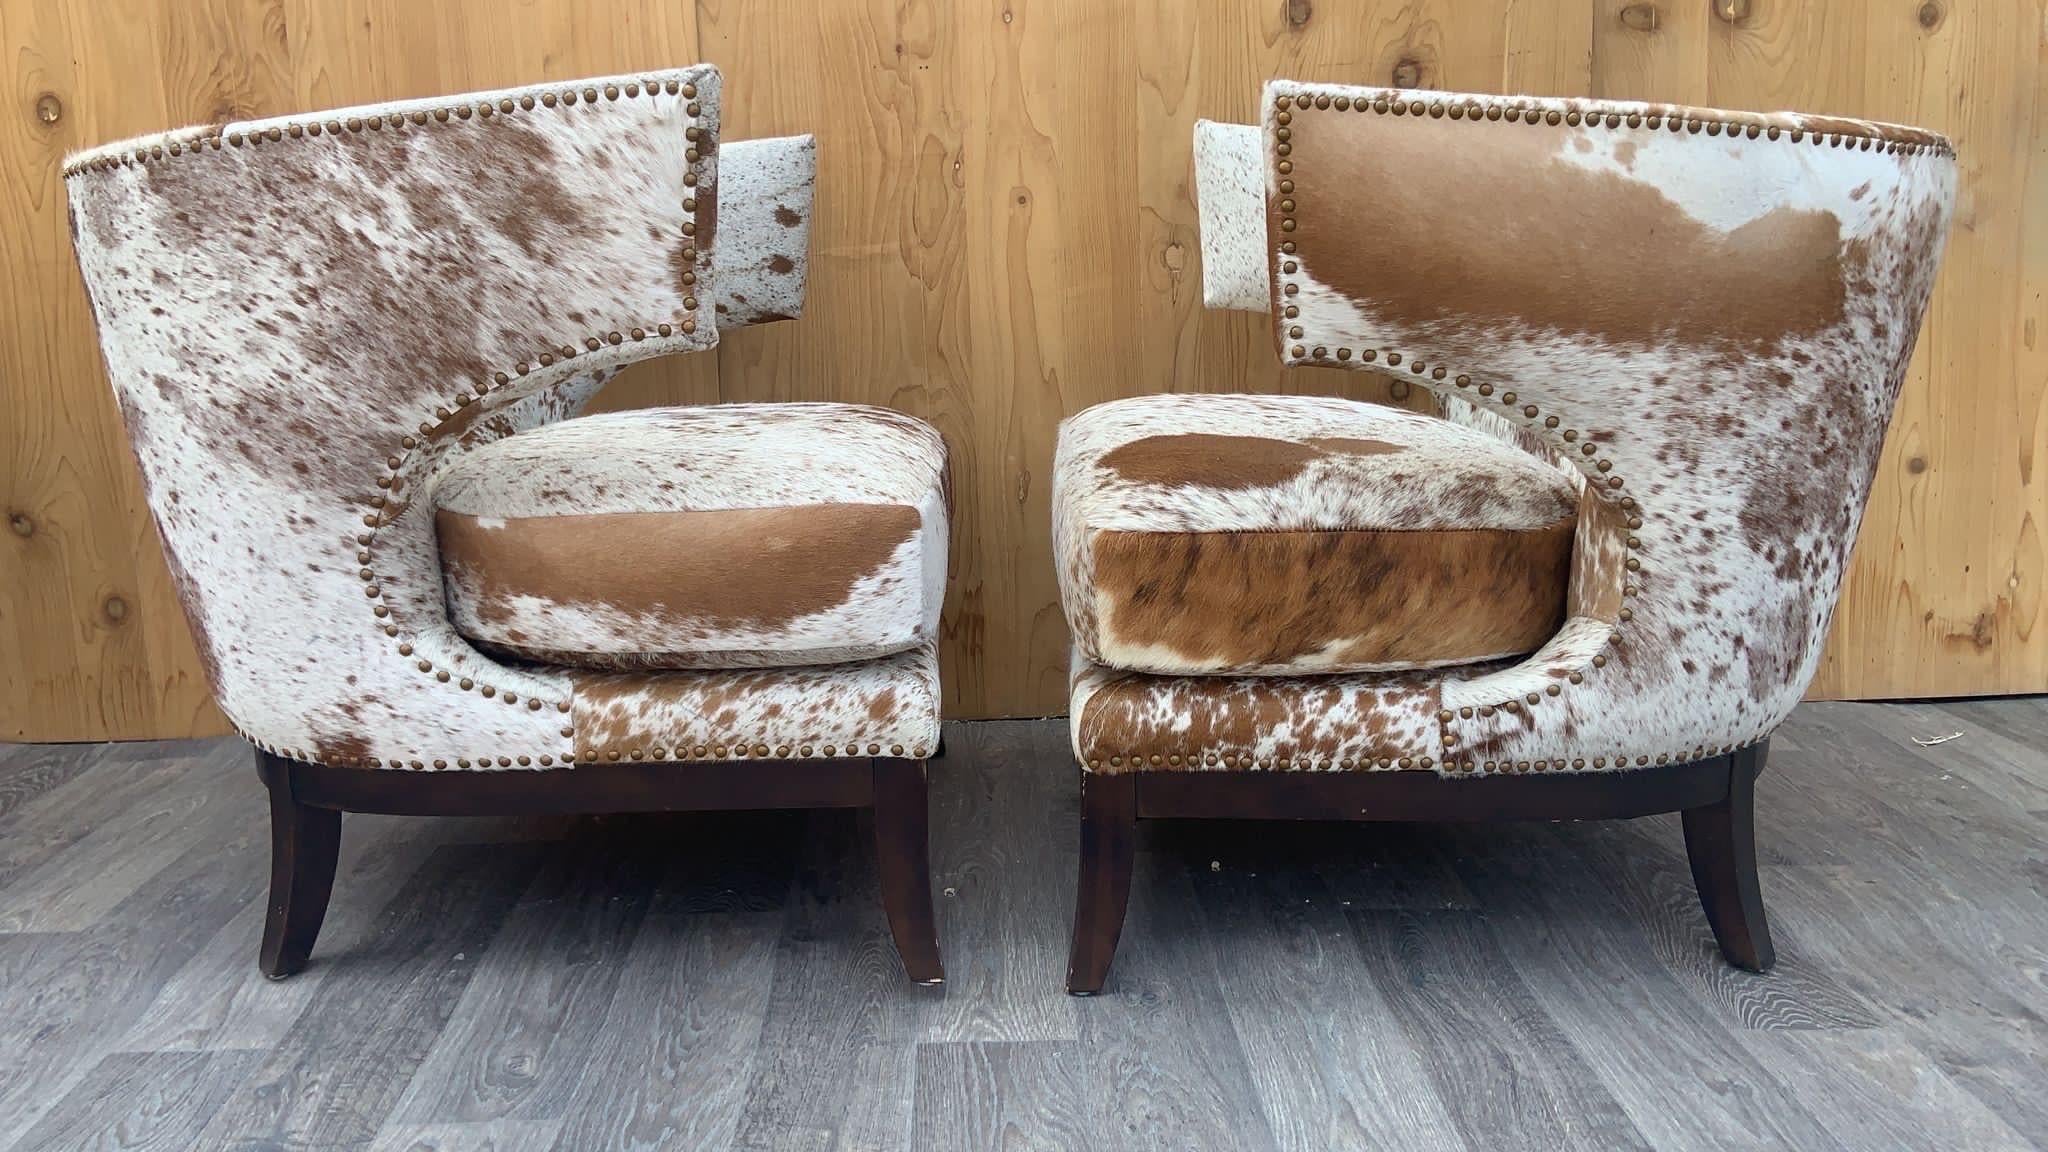 English Horseshoe Savoy Chairs Newly Upholstered in Brazilian Cowhide - Set of 2 2